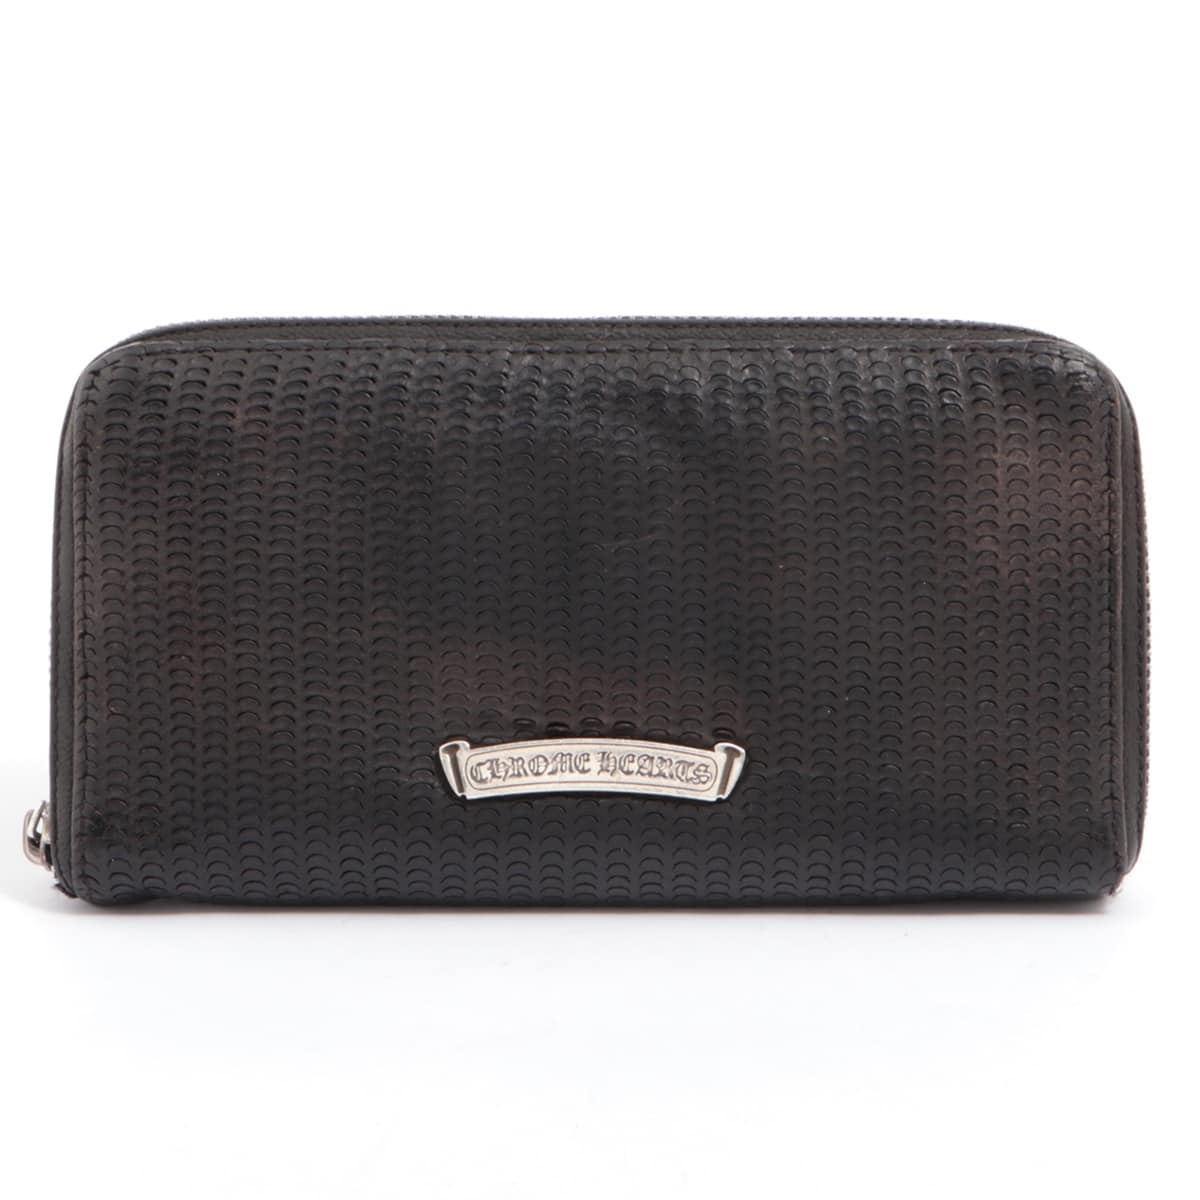 Chrome Hearts REC F ZIP Wallet Novelty leather With invoice There are internal threads and dirt